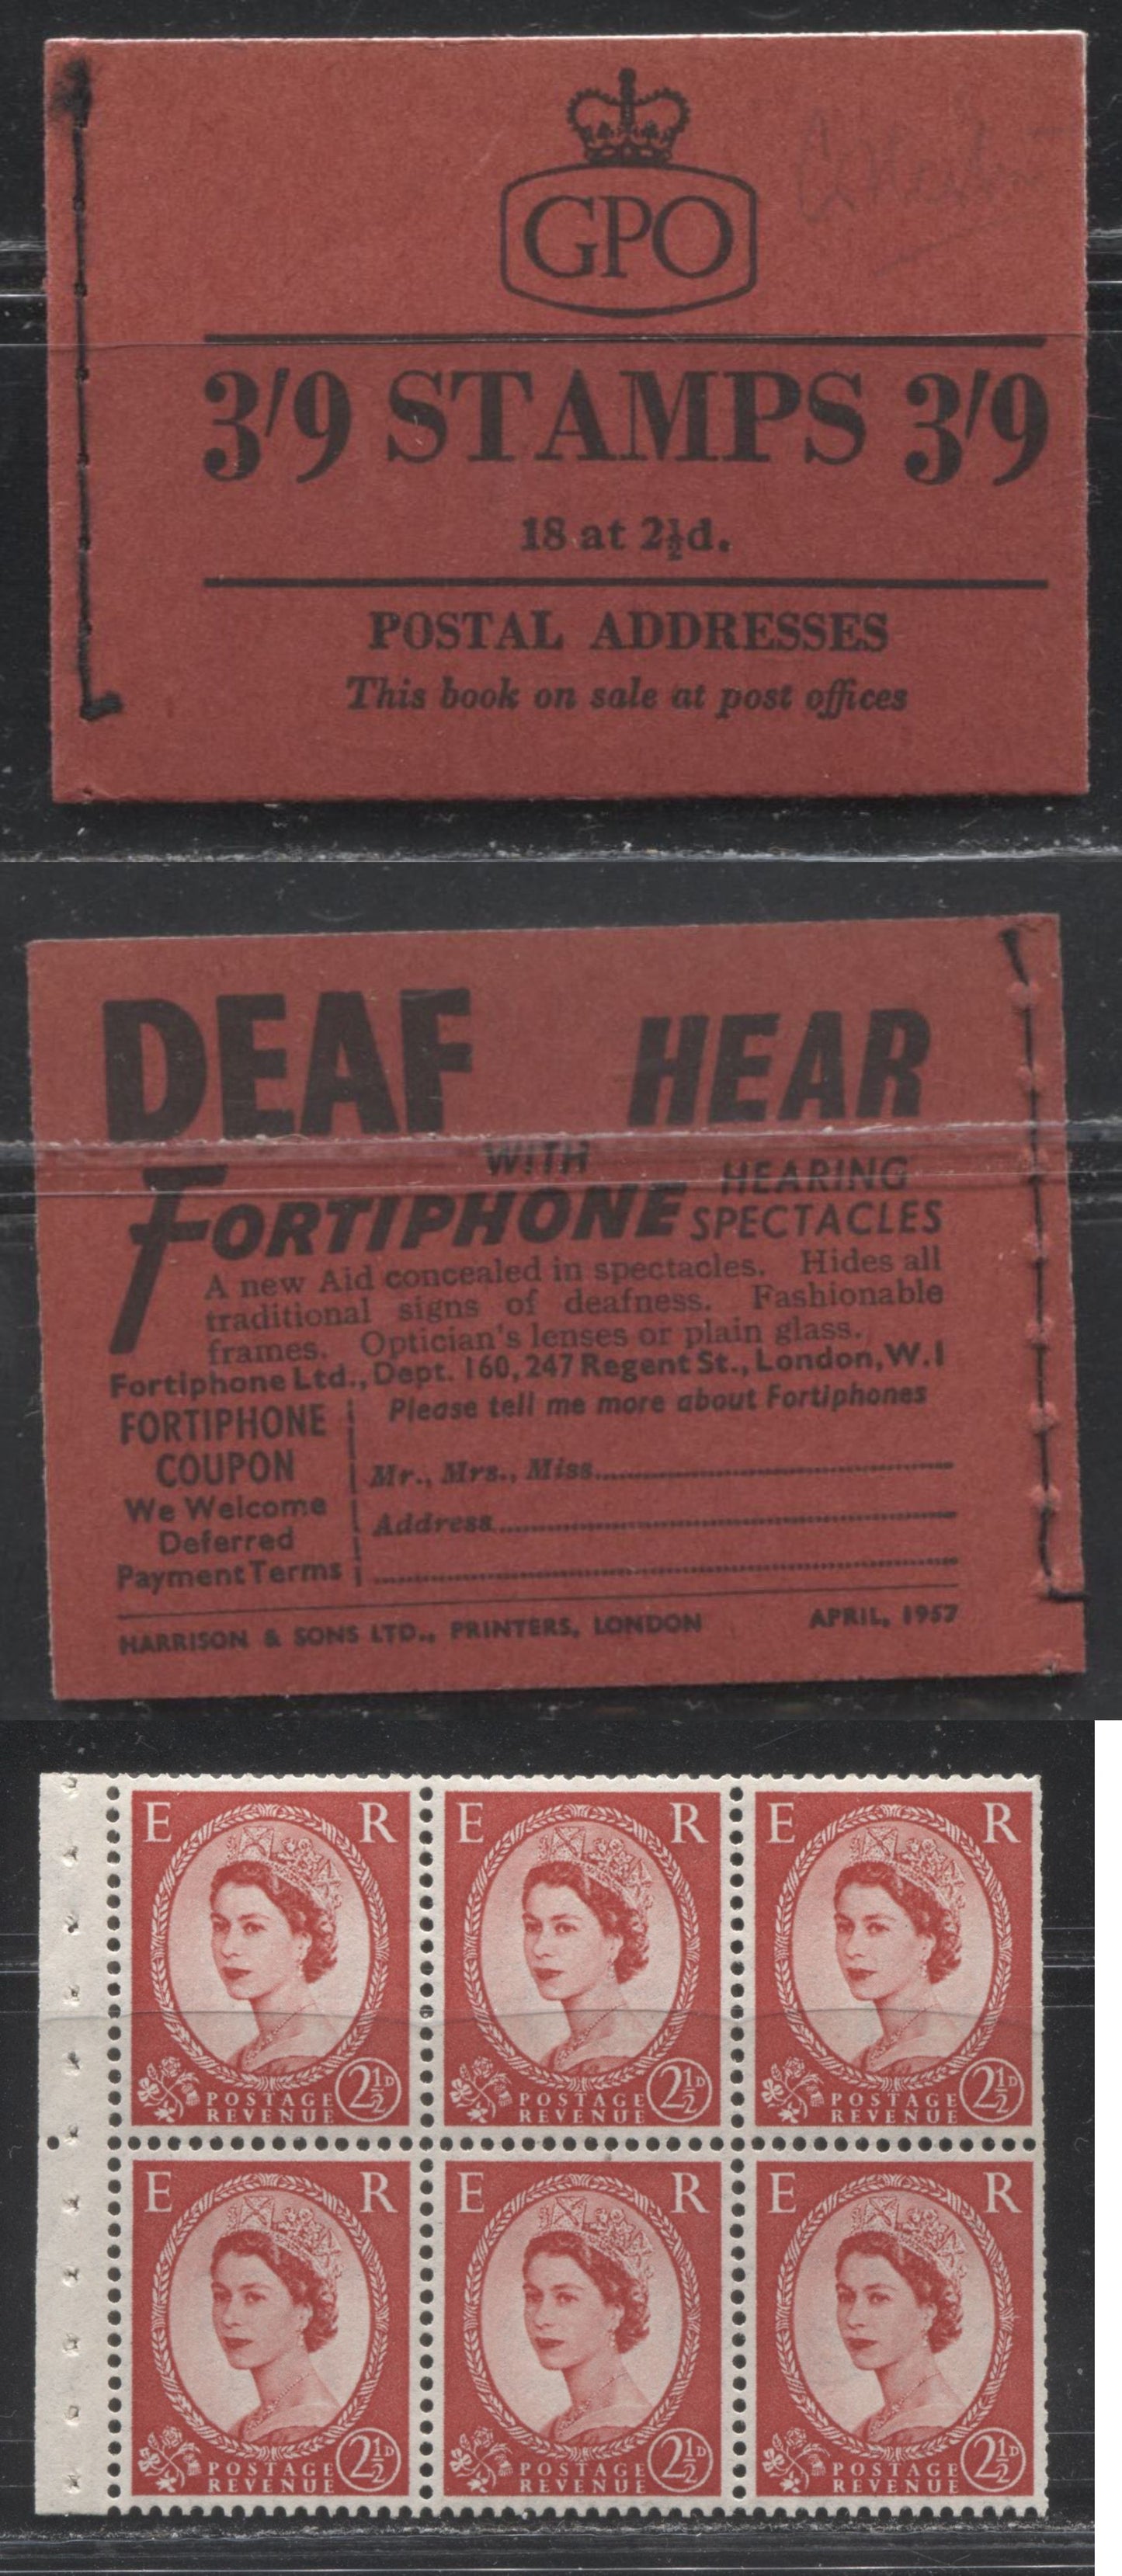 Great Britain SG#G19 3/9 Deep Red & Black Cover 1956-1959 Wilding Issue, A Complete Booklet With Upright St. Edward's Crown Watermark, Panes of 6, Type B GPO Cypher, April 1957